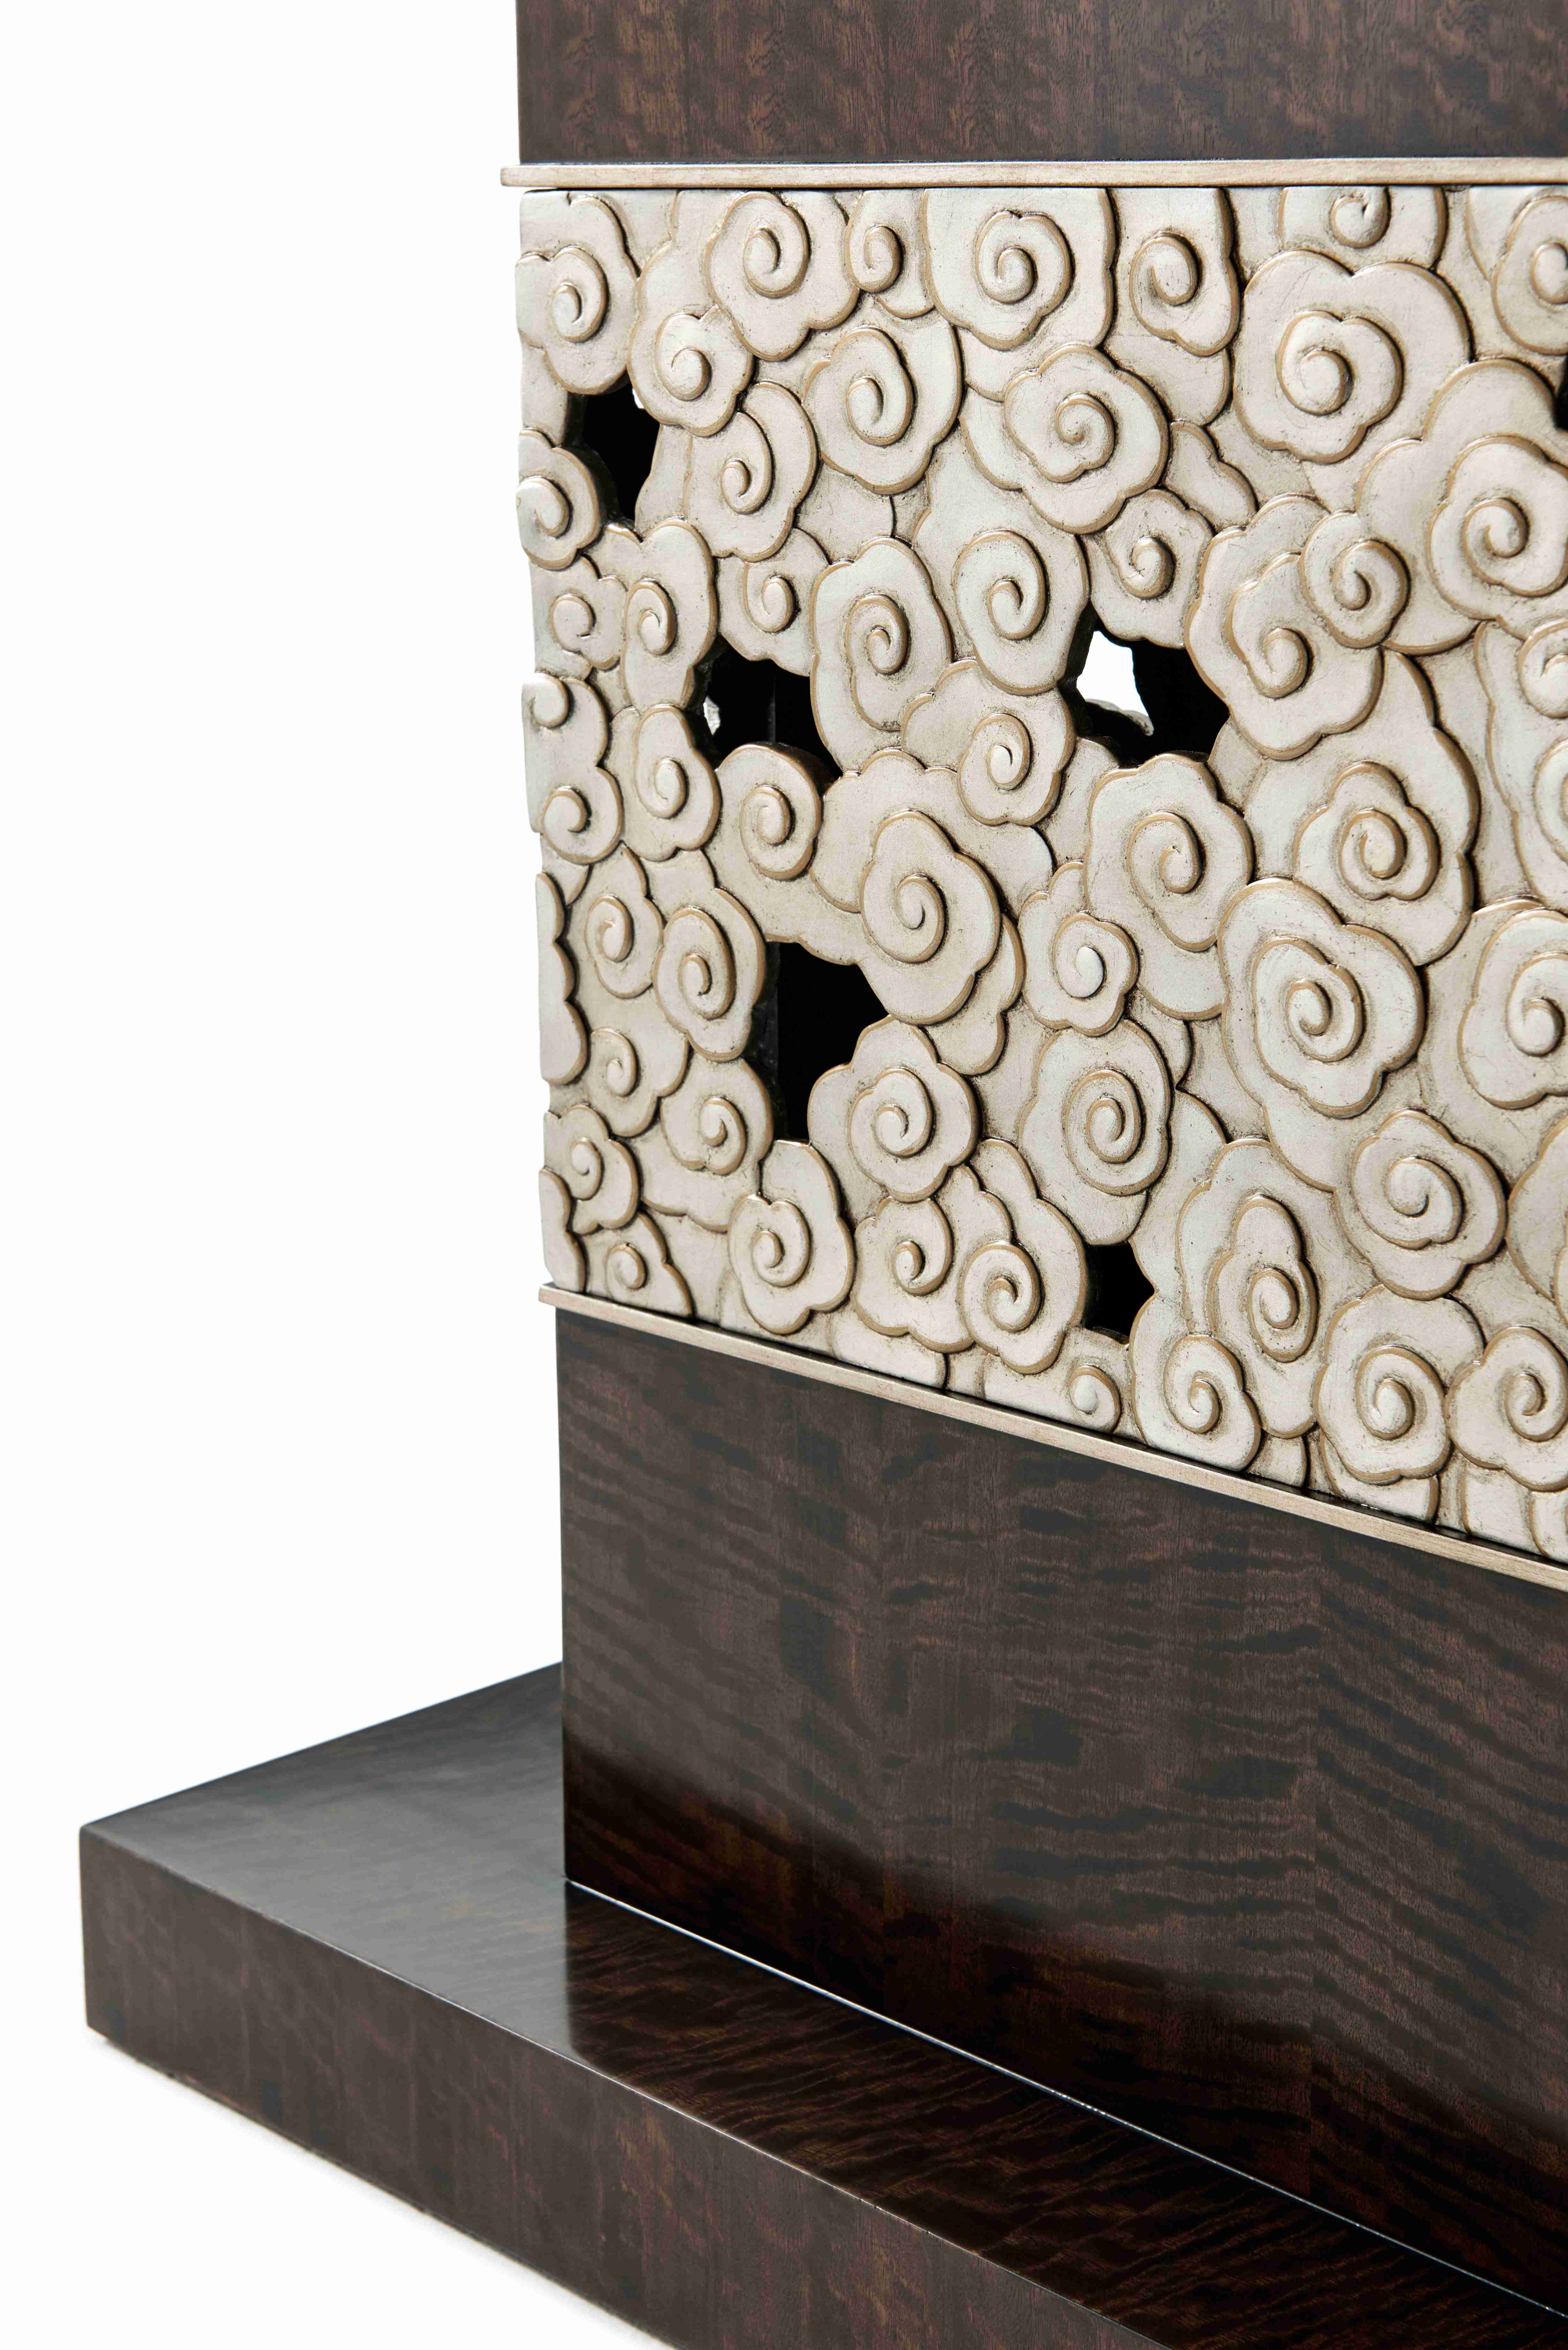 CAMILLE CONSOLE TABLE